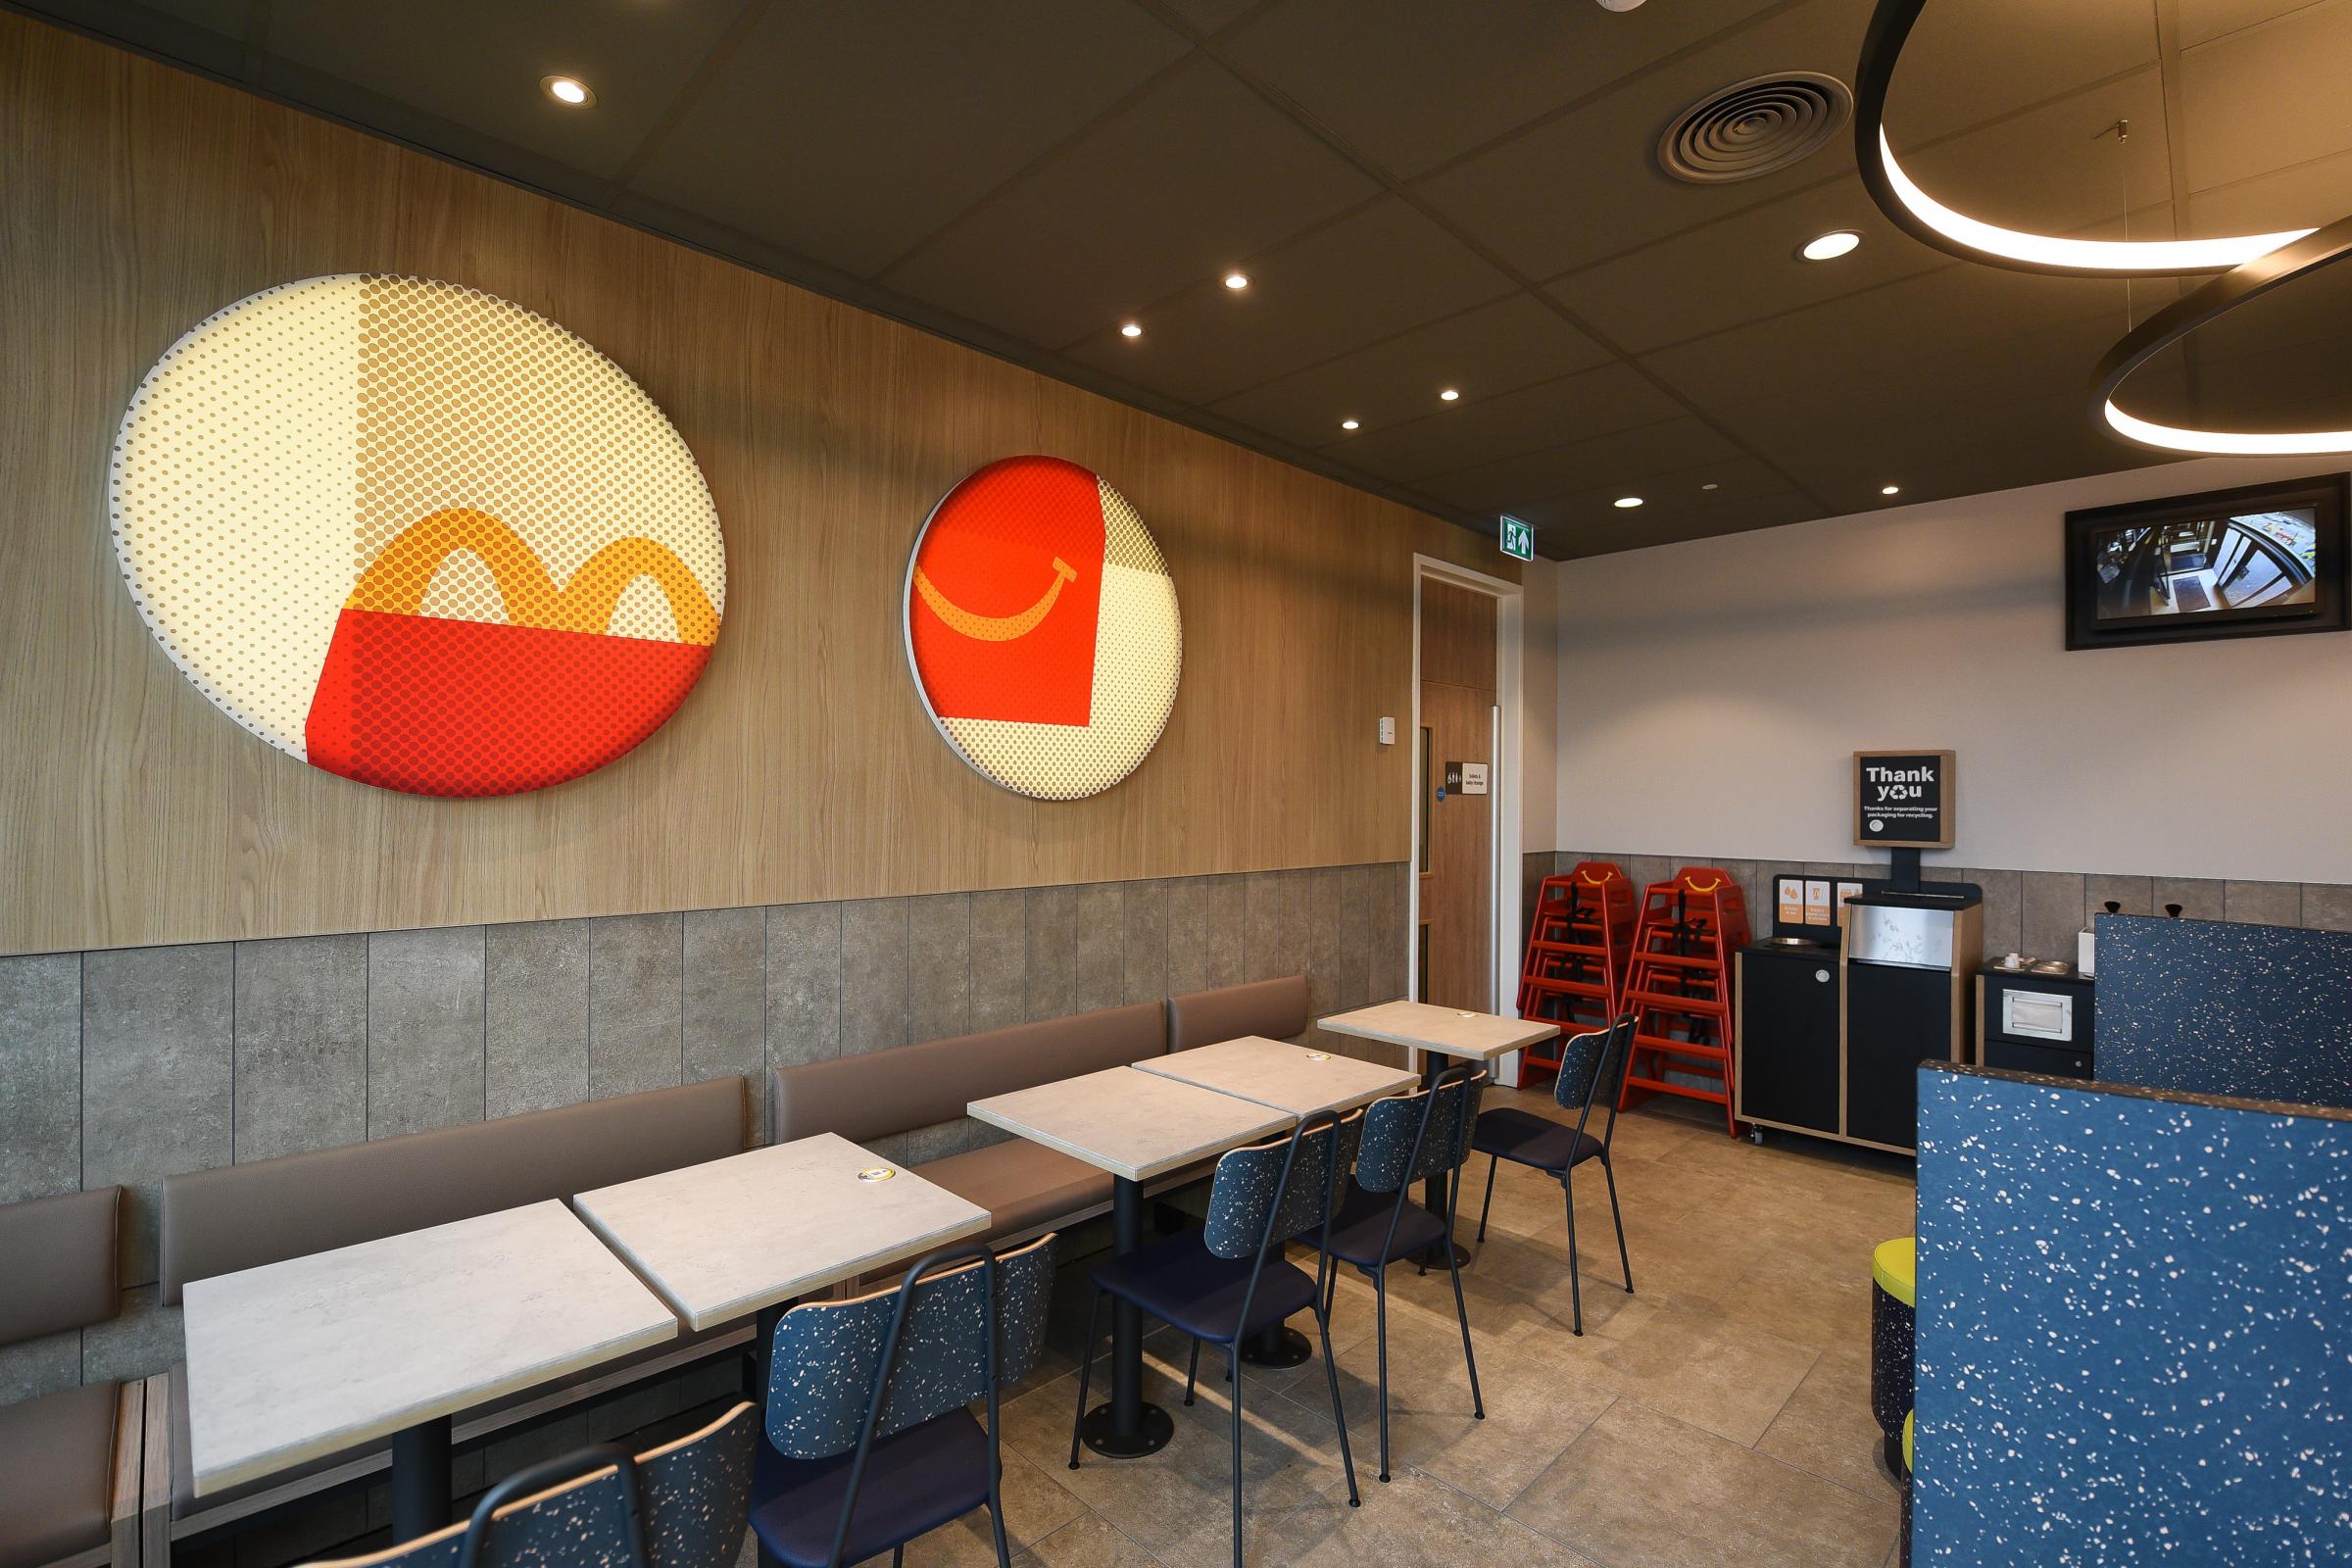 First look inside the new McDonald’s restaurant which has opened at Omega retail park